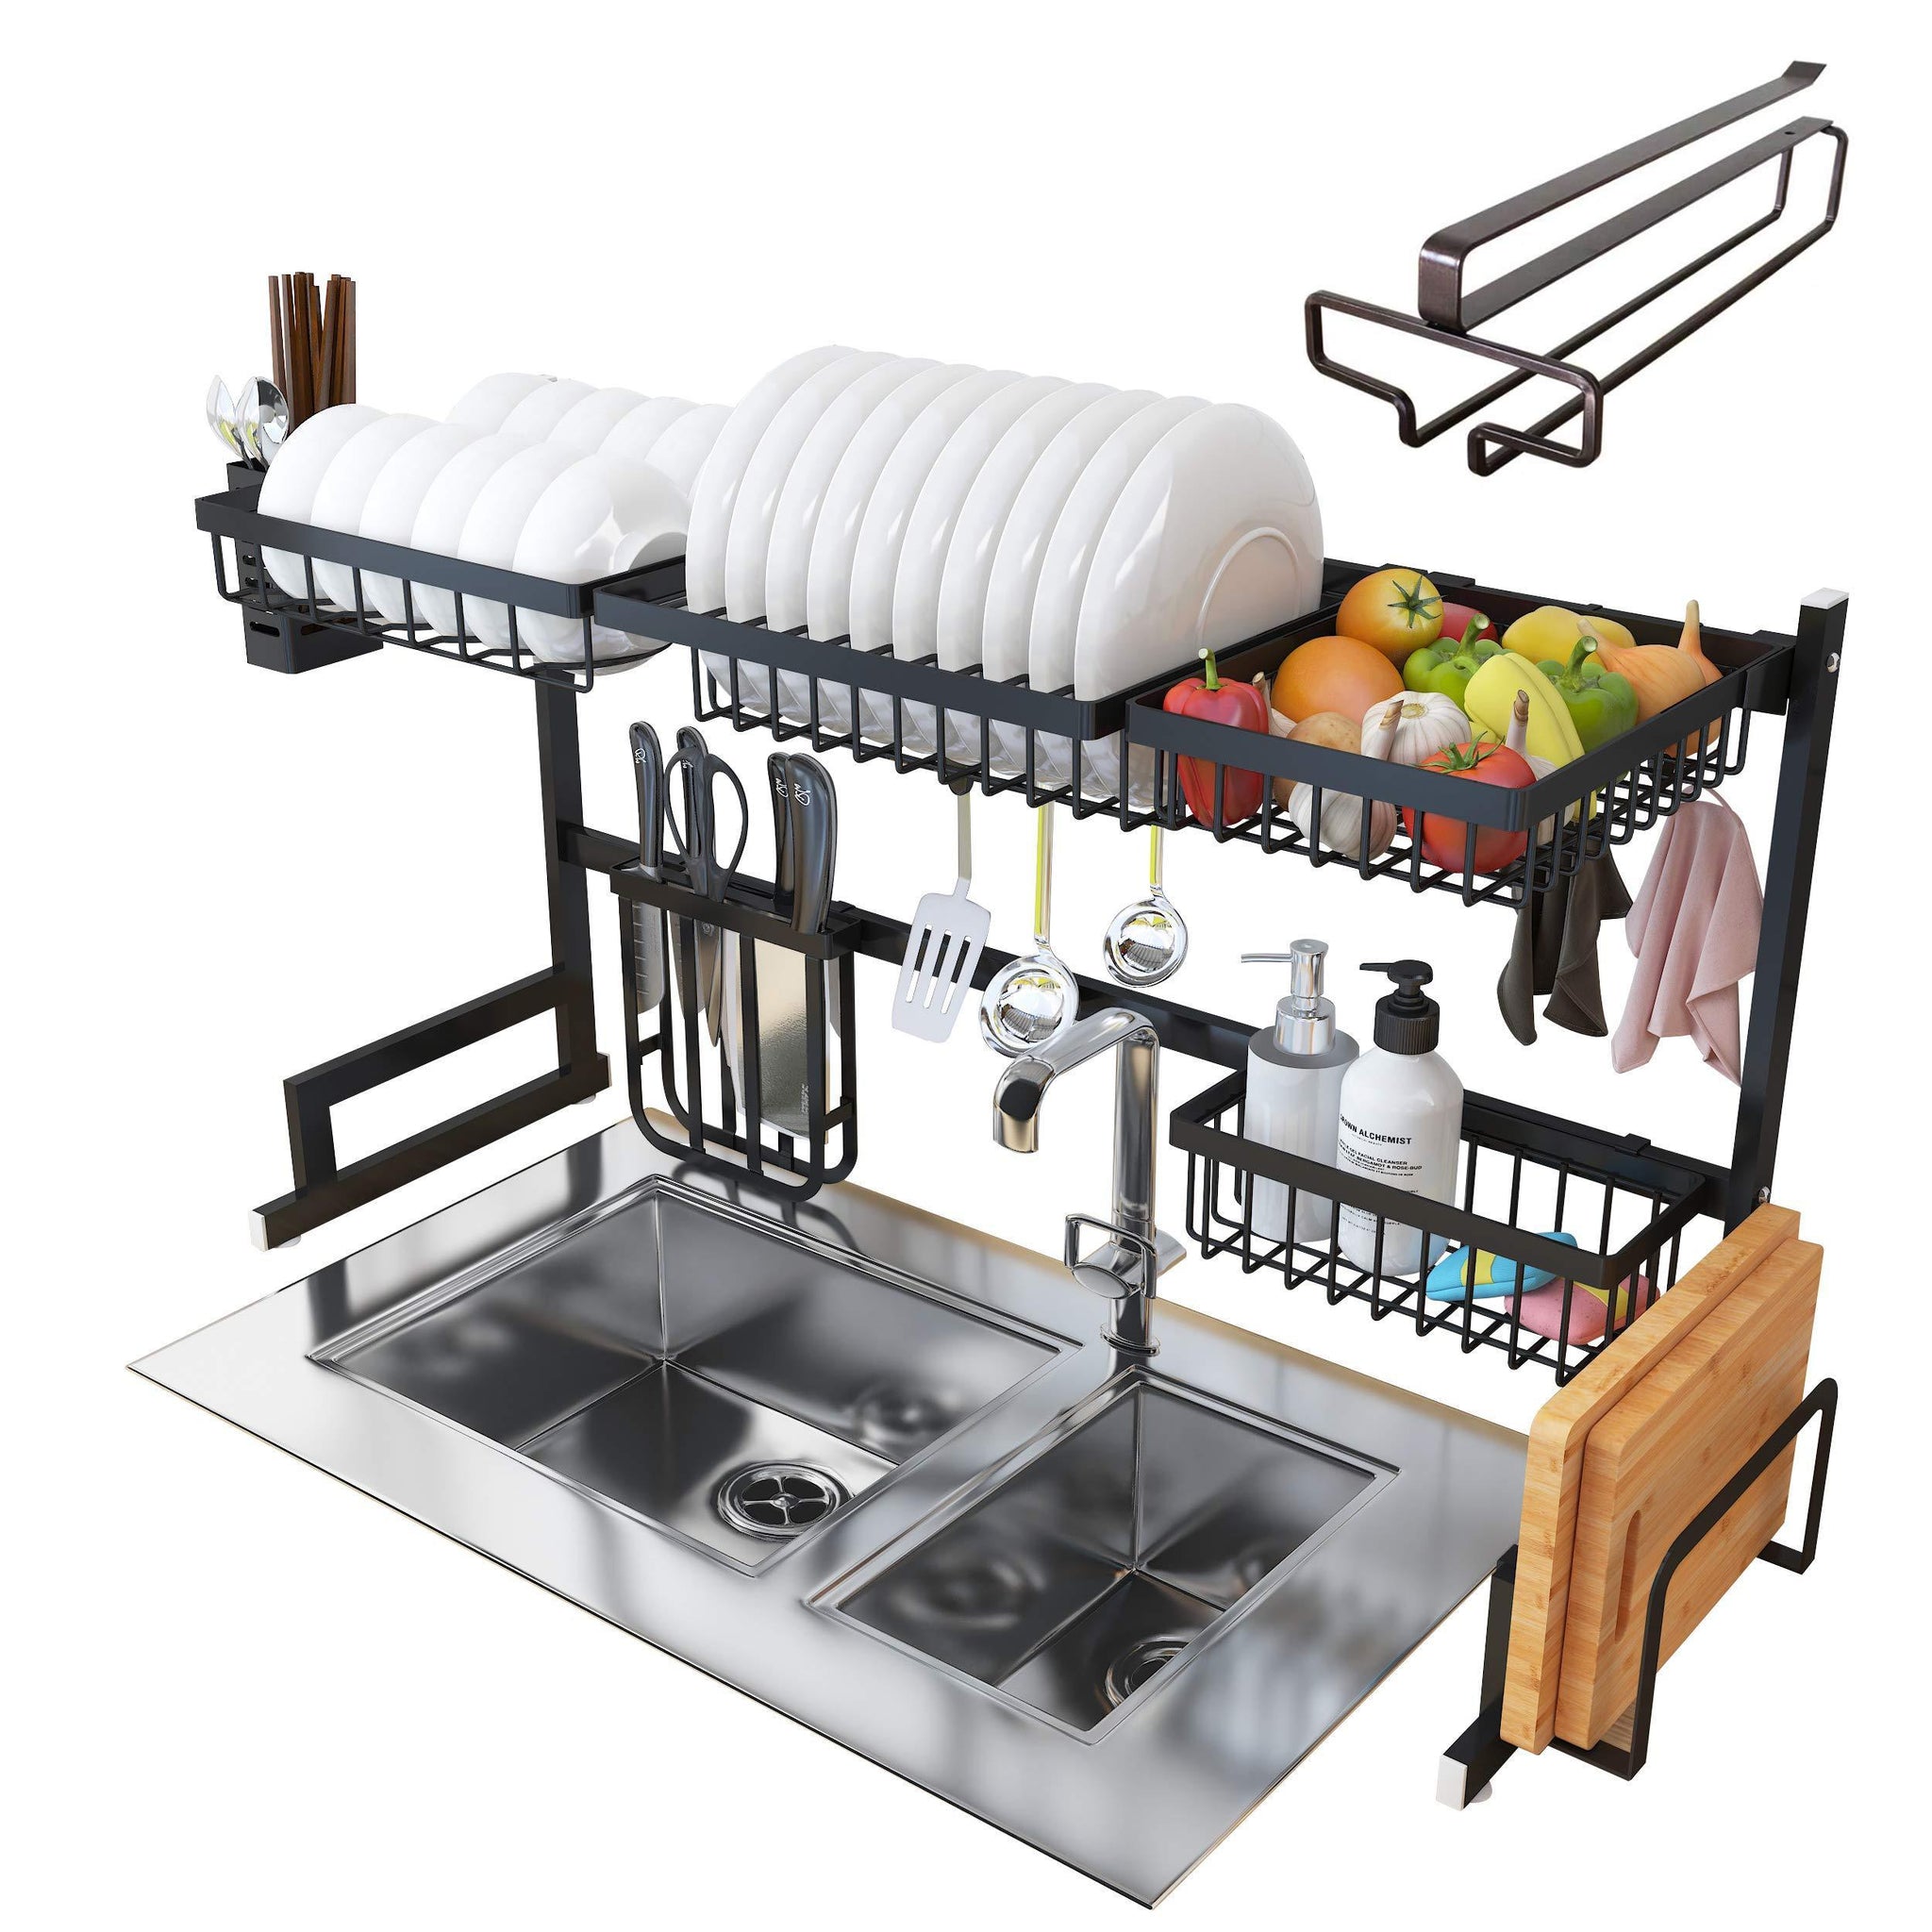 Kitchen over sink dish drying rack kitchen organizer and dish drainer with 7 interchangeable racks and caddies plus bonus wine glass rack that mounts to cabinetry